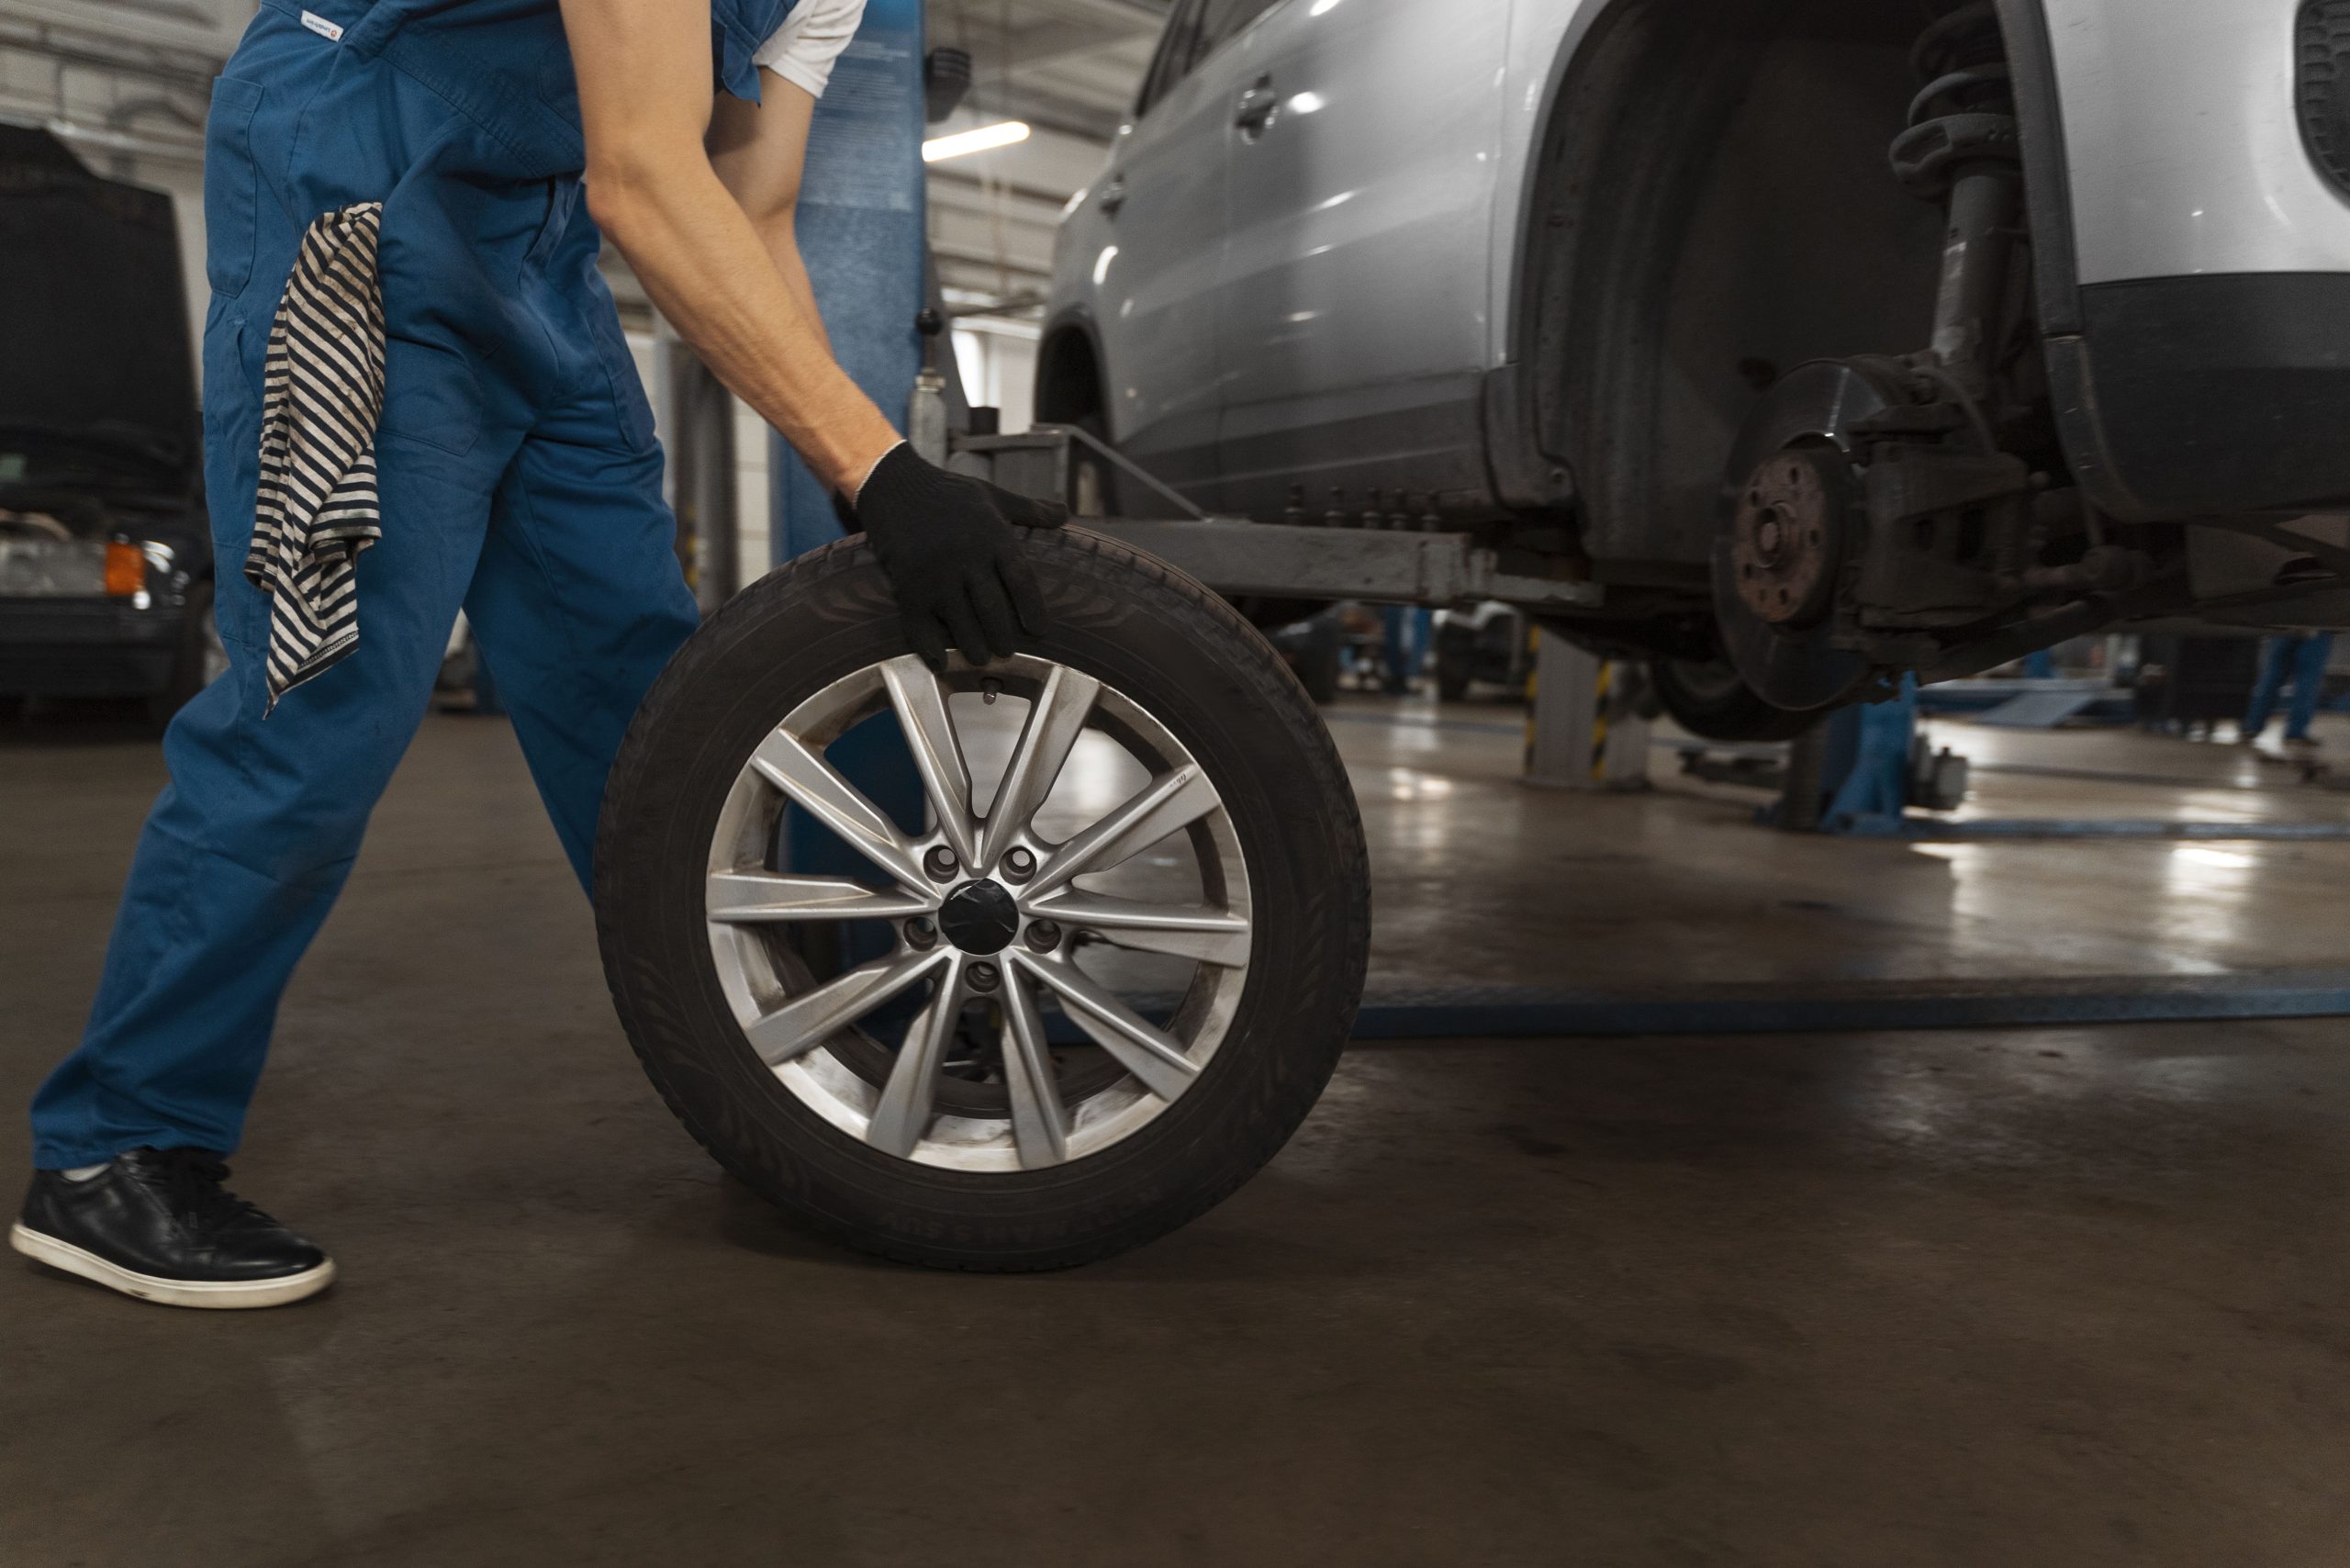 Tyre-and-suspension-repair-service-by-carage-in-dubai-uae-min